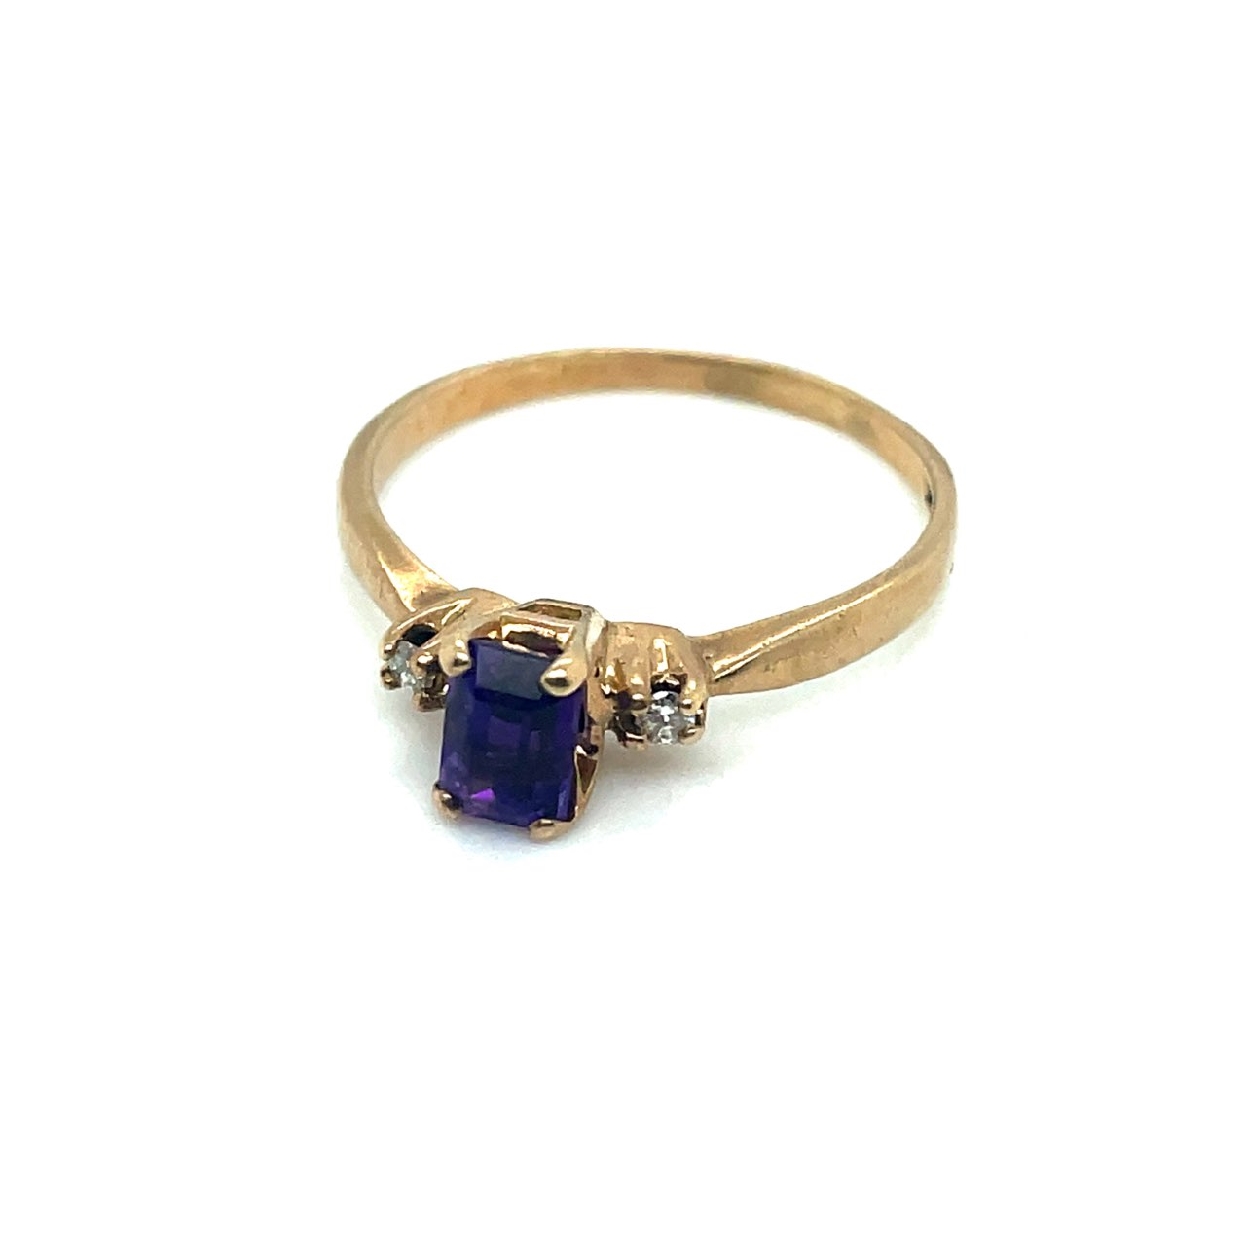 10K Yellow Gold Amethyst Ring with .04CT Full Cut Diamonds Size 9